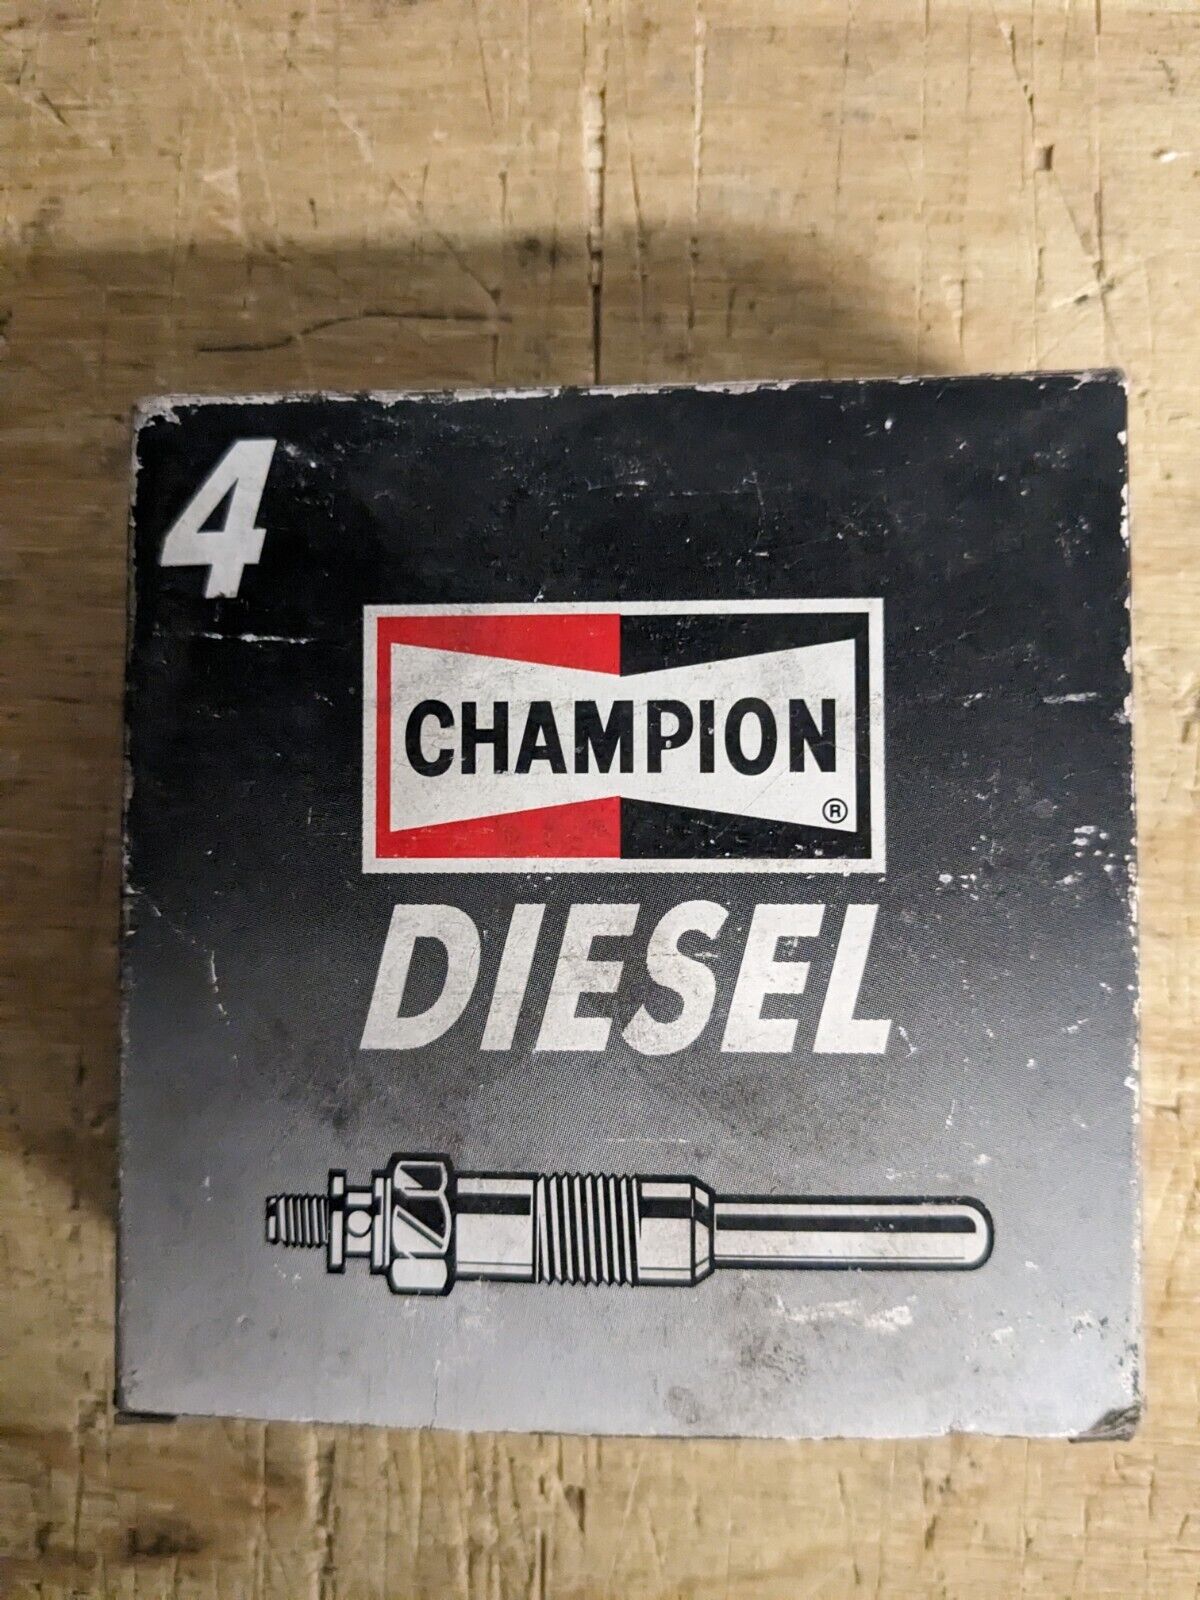 New Old Stock Diesel Glow Plugs Champion 177 CH77 Box of 4